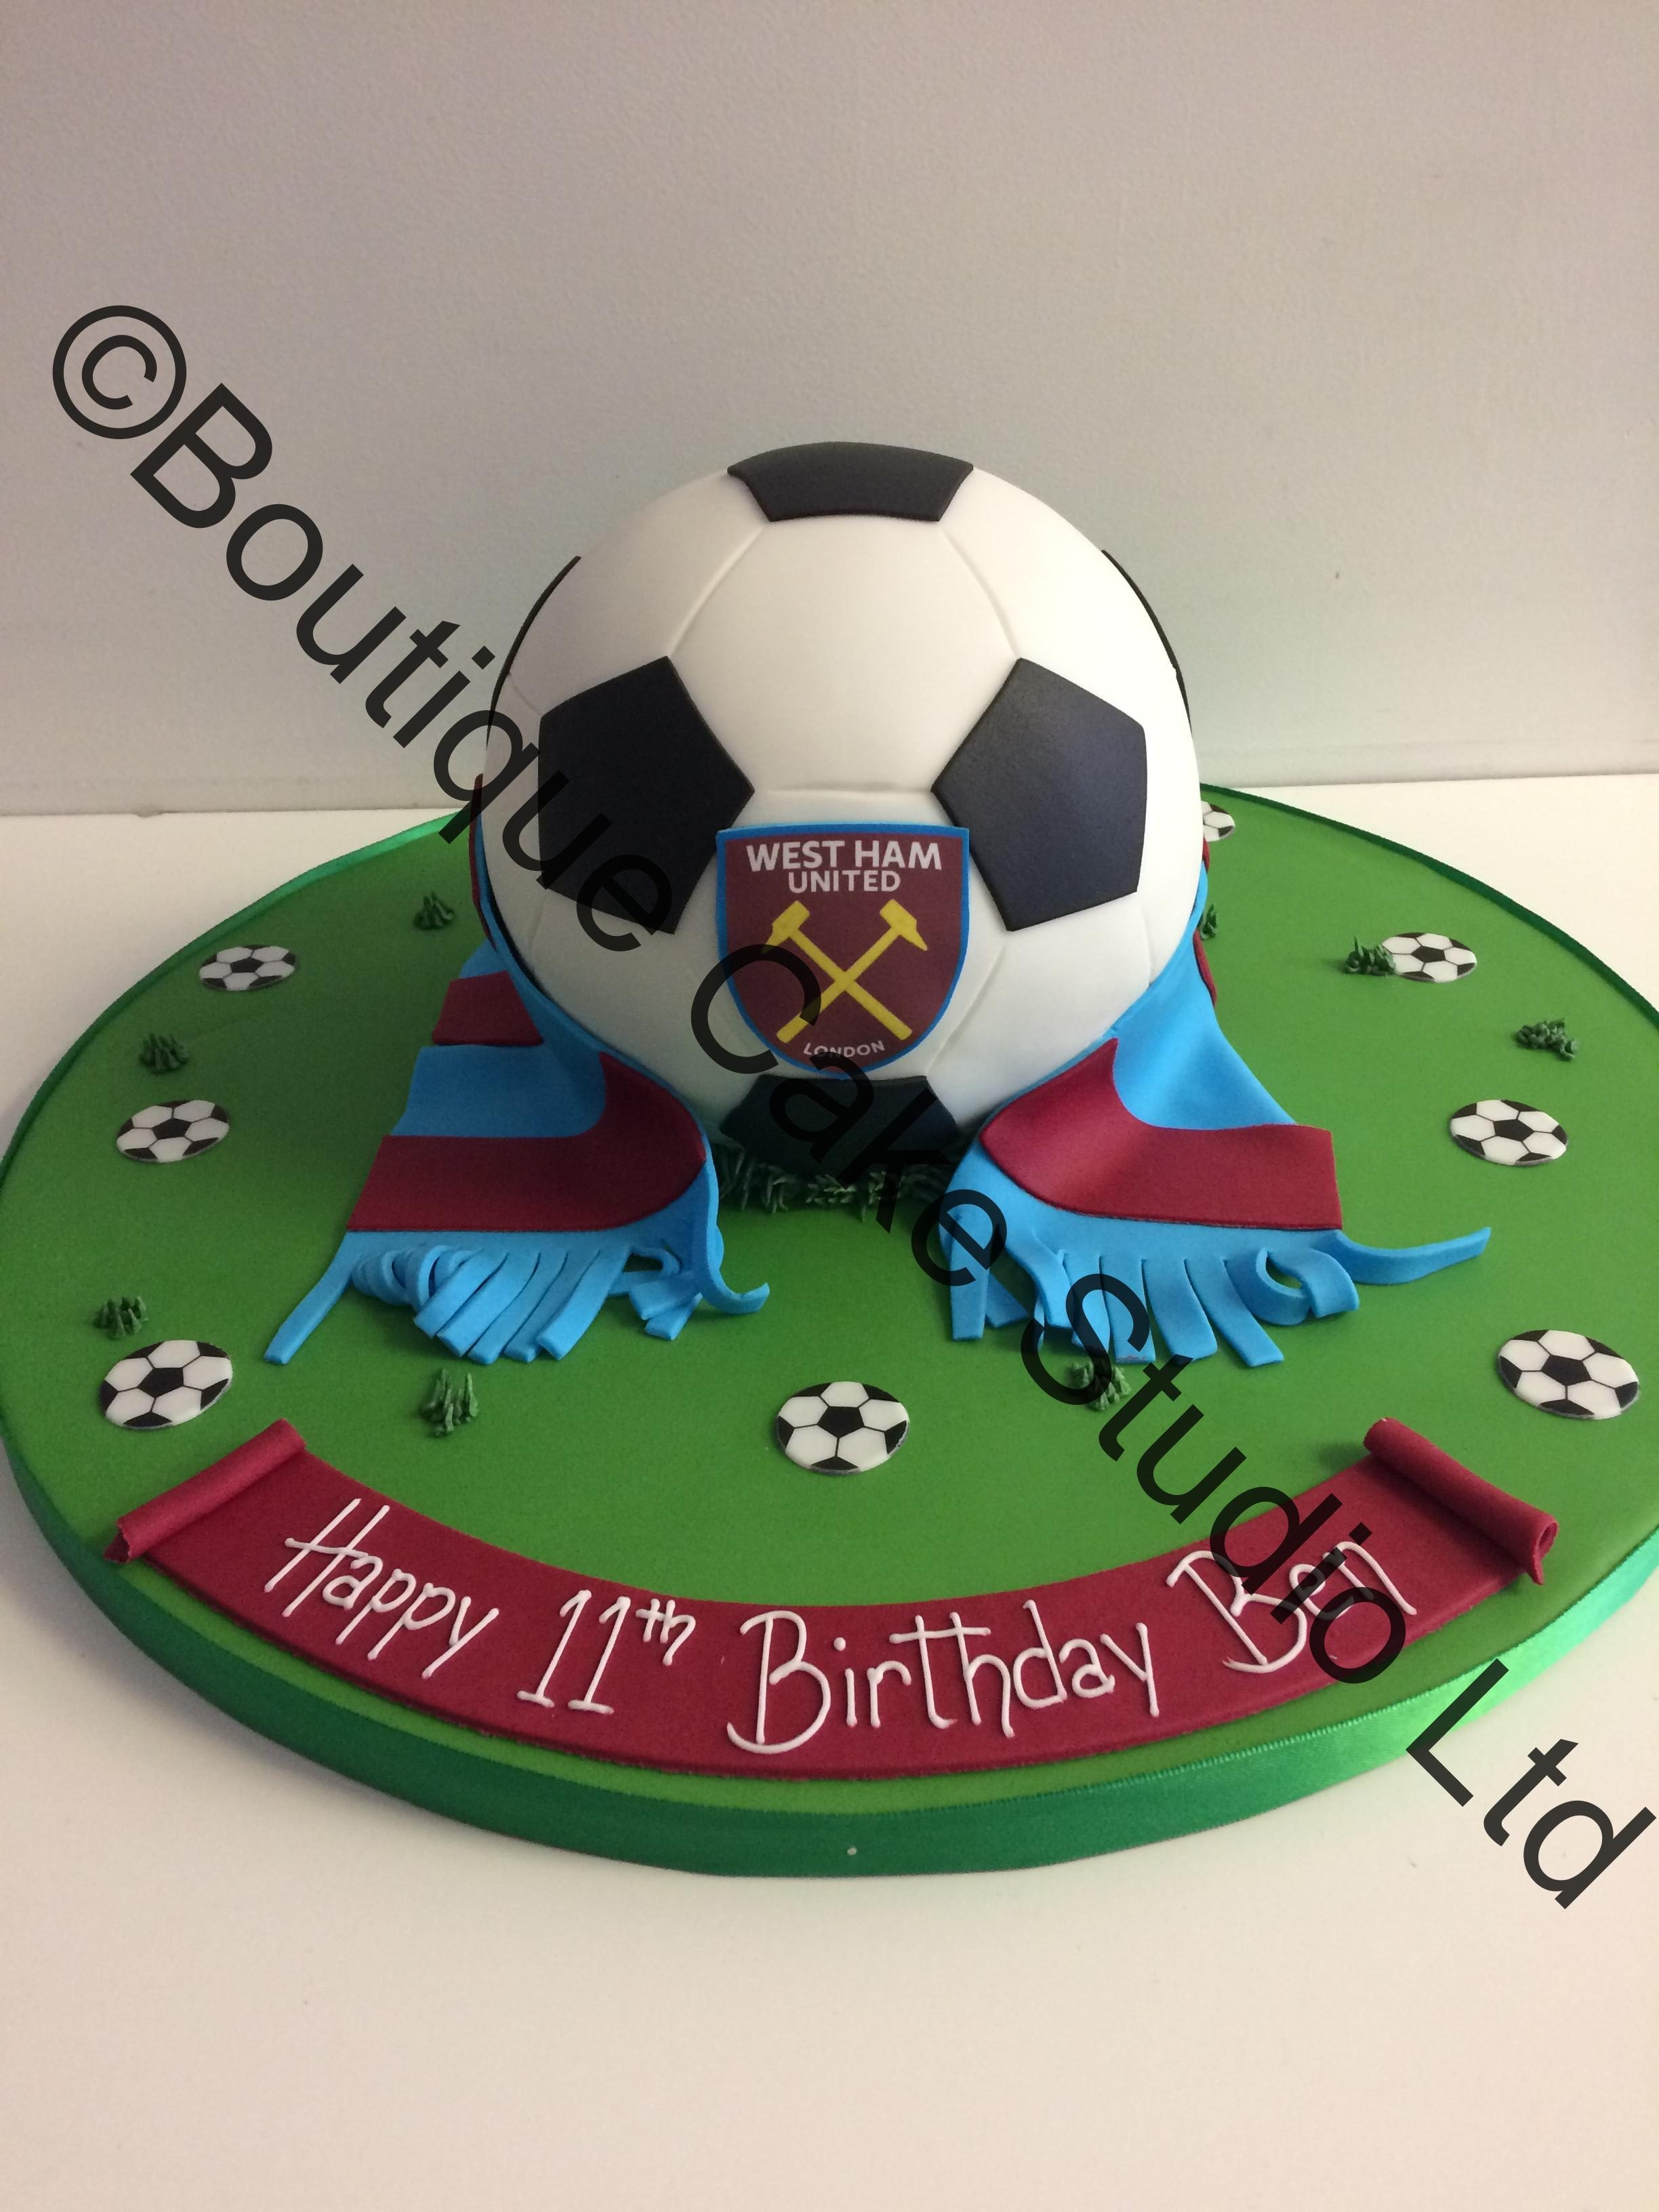 Full Football Cake with scarf